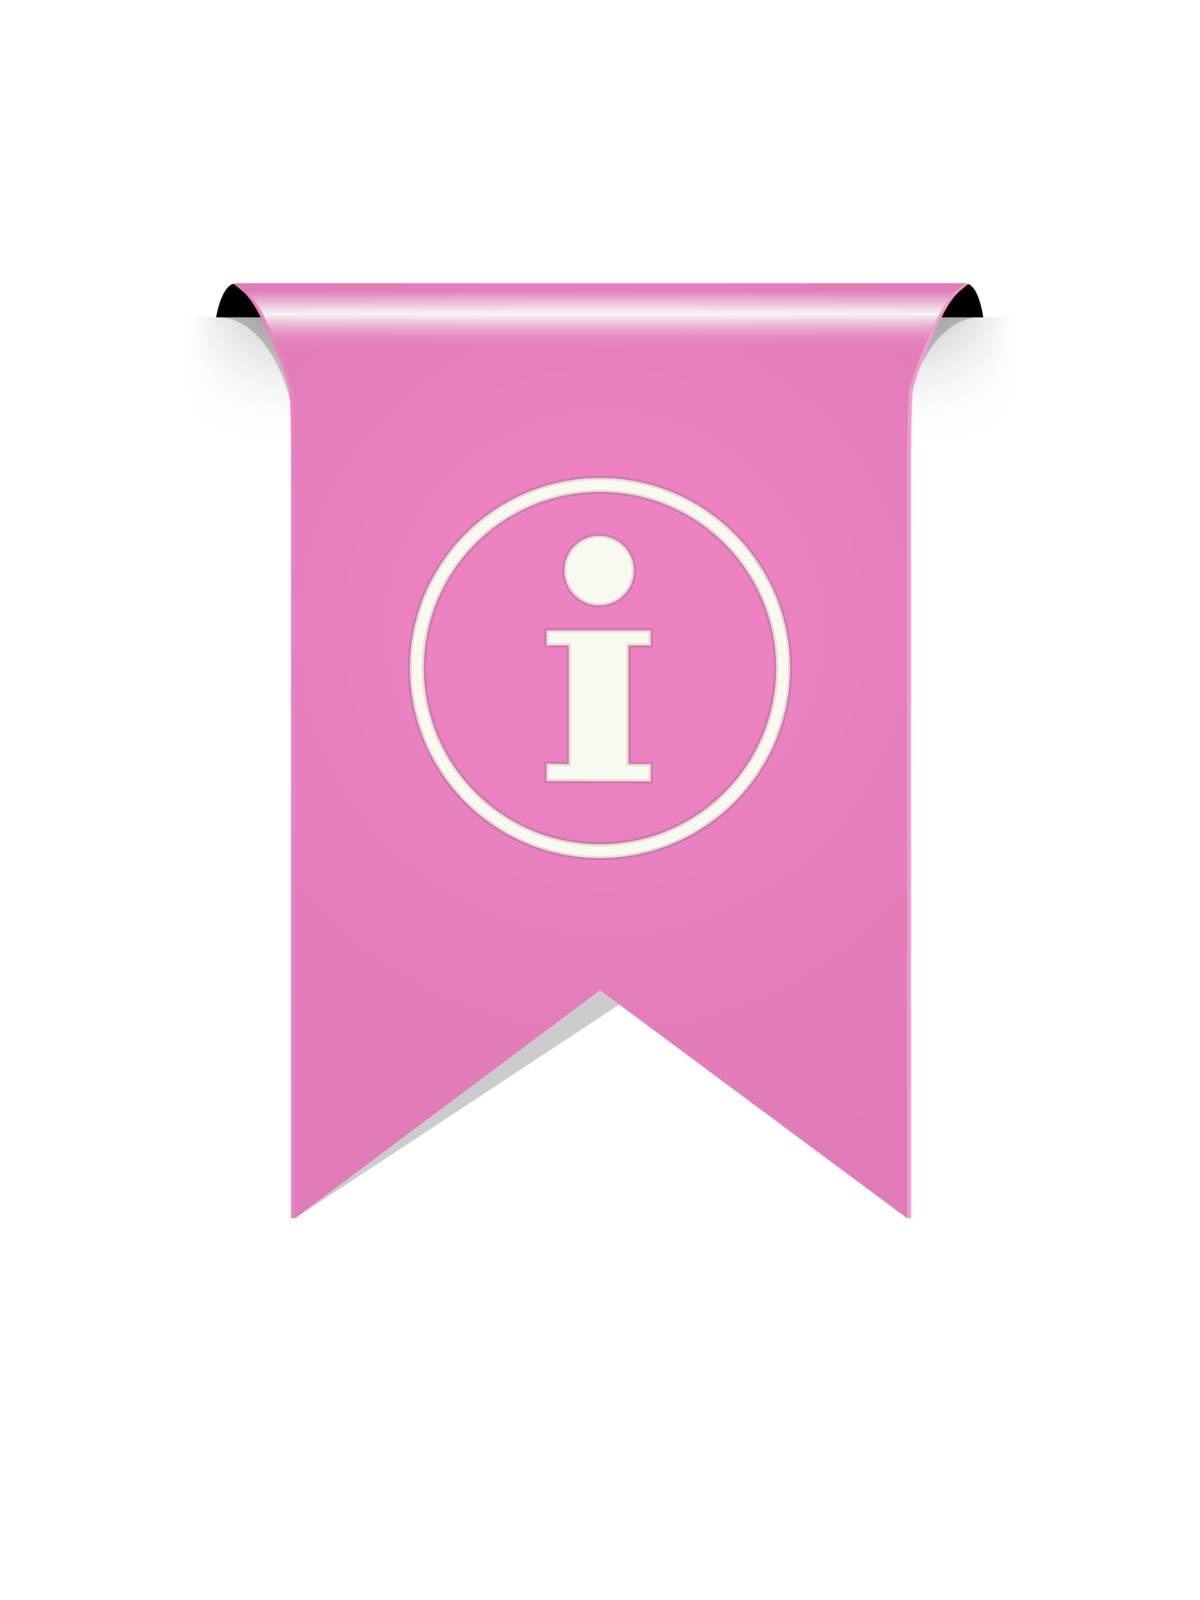 The pink ribbon with info pictogram by madtom